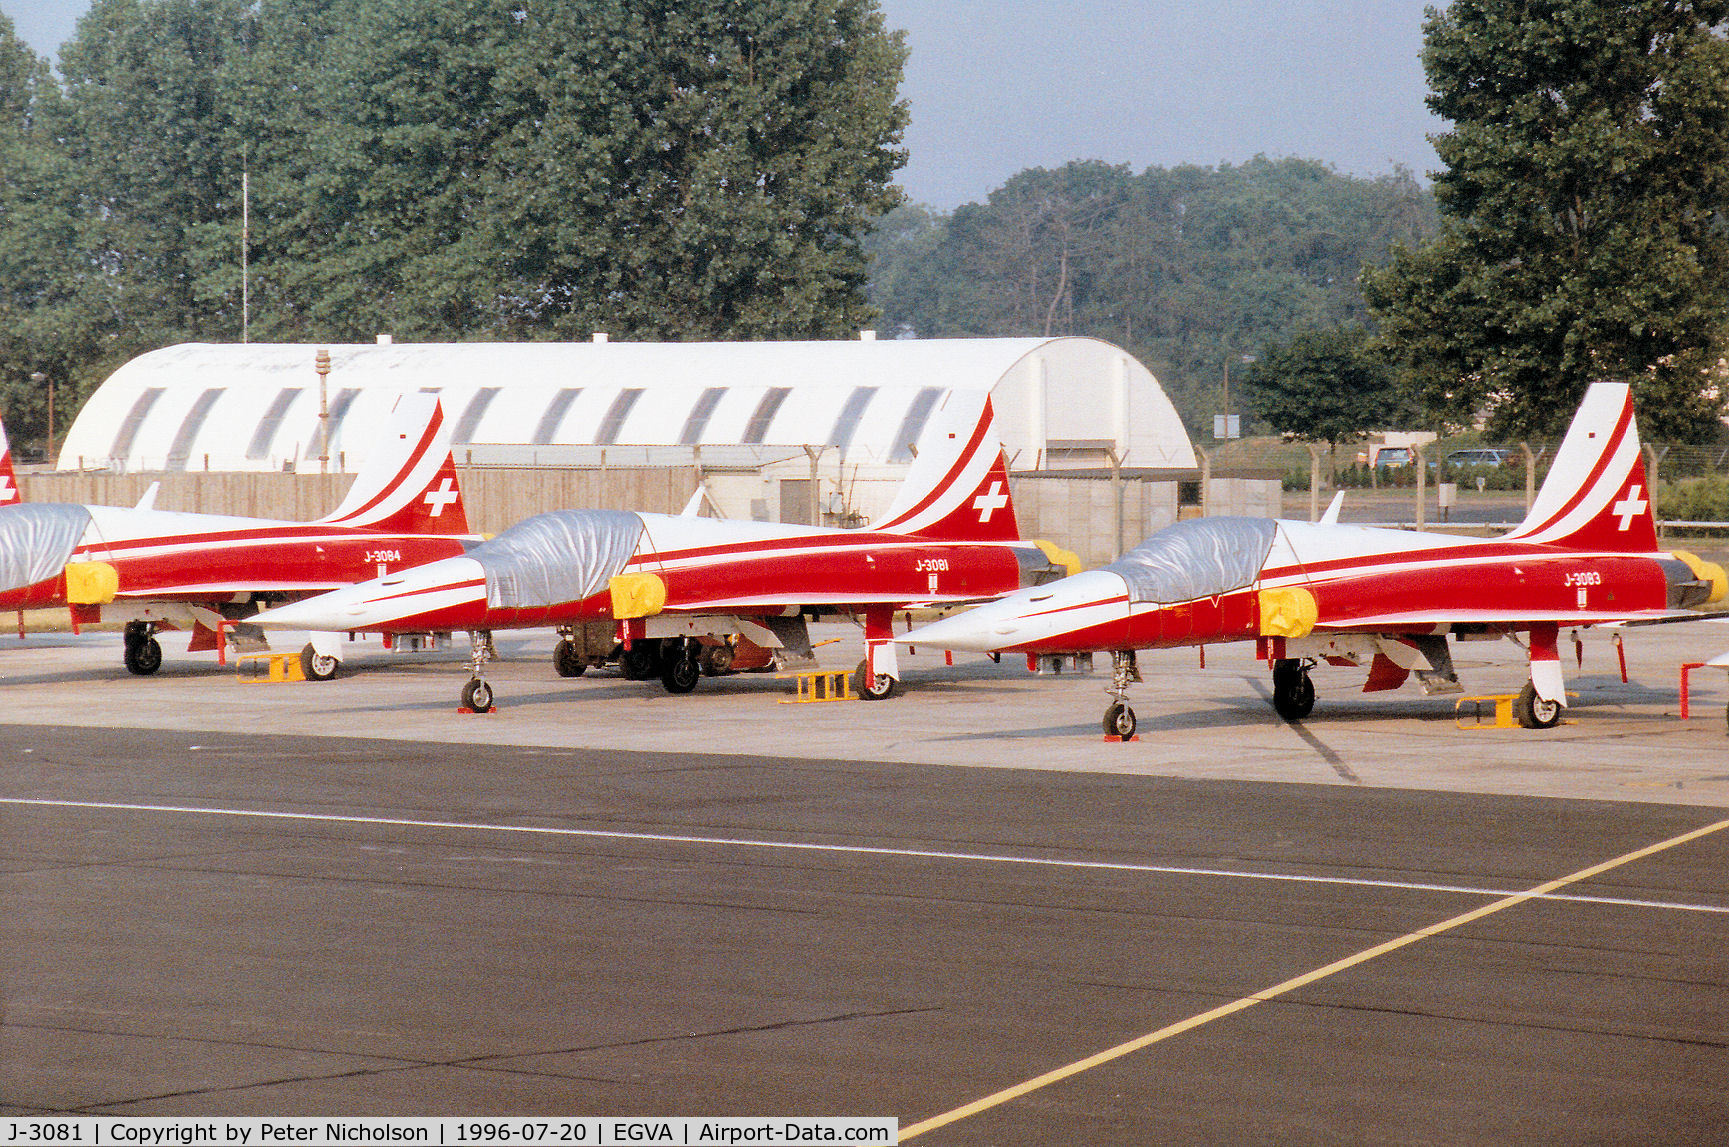 J-3081, Northrop F-5E Tiger II C/N L.1081, F-5E Tiger II of the Patrouille Suisse aerobatic display team on the flight-line at the 1996 Royal Intnl Air Tattoo at RAF Fairford.